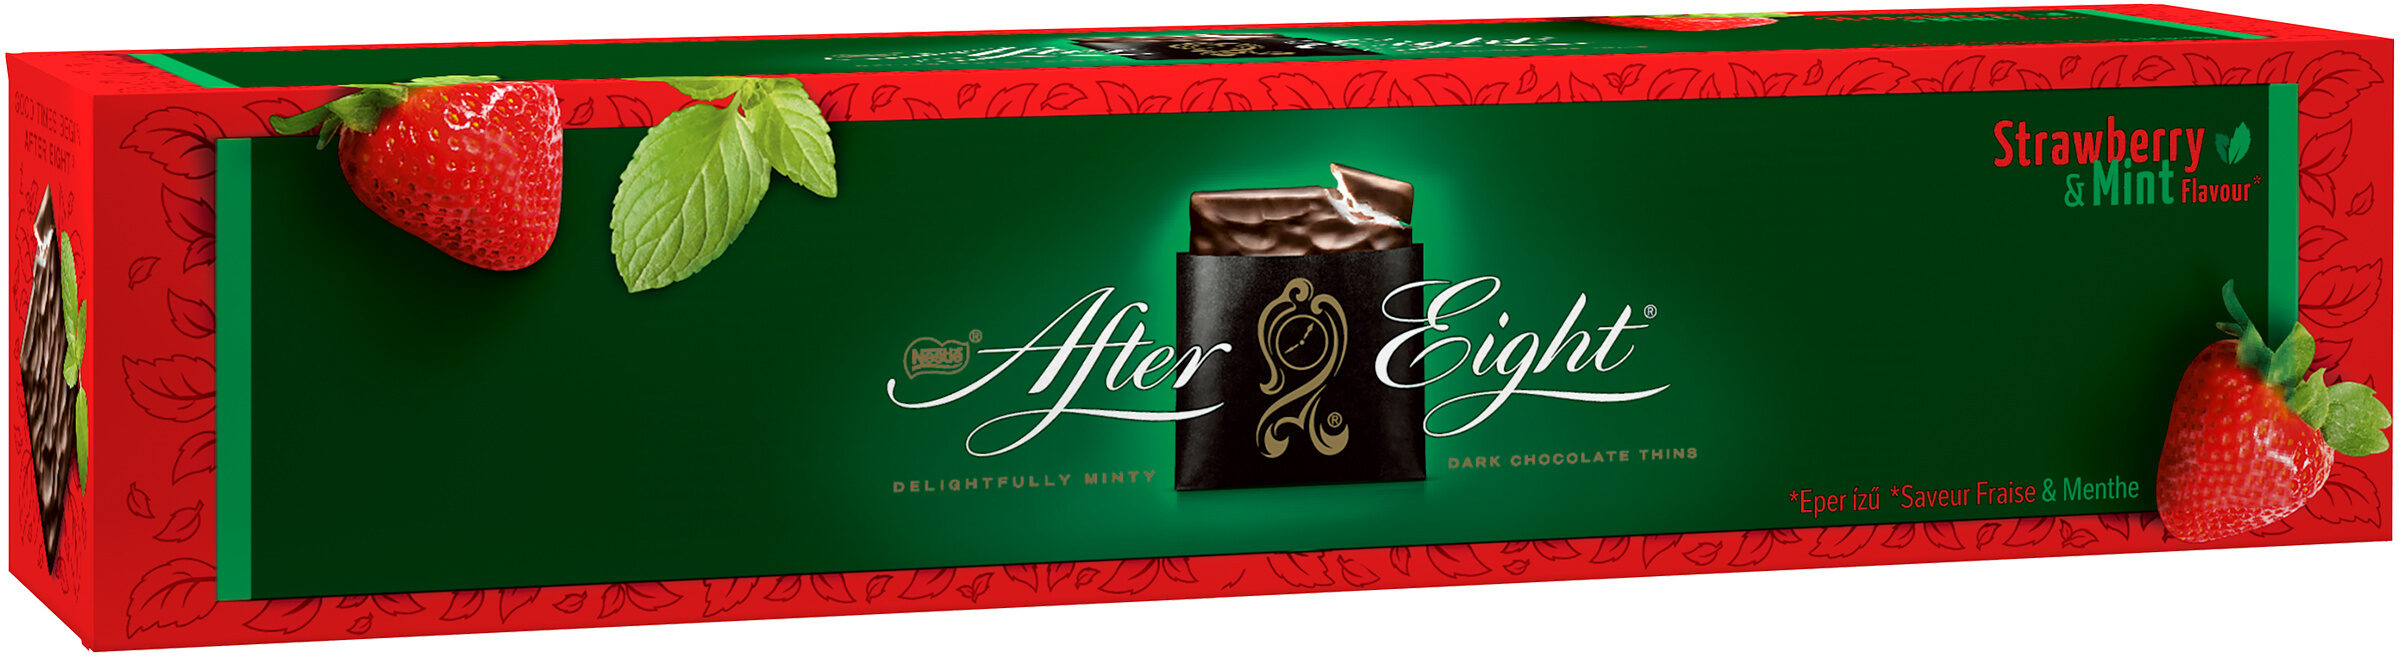 AFTER EIGHT Fraise 400g - Producte - fr